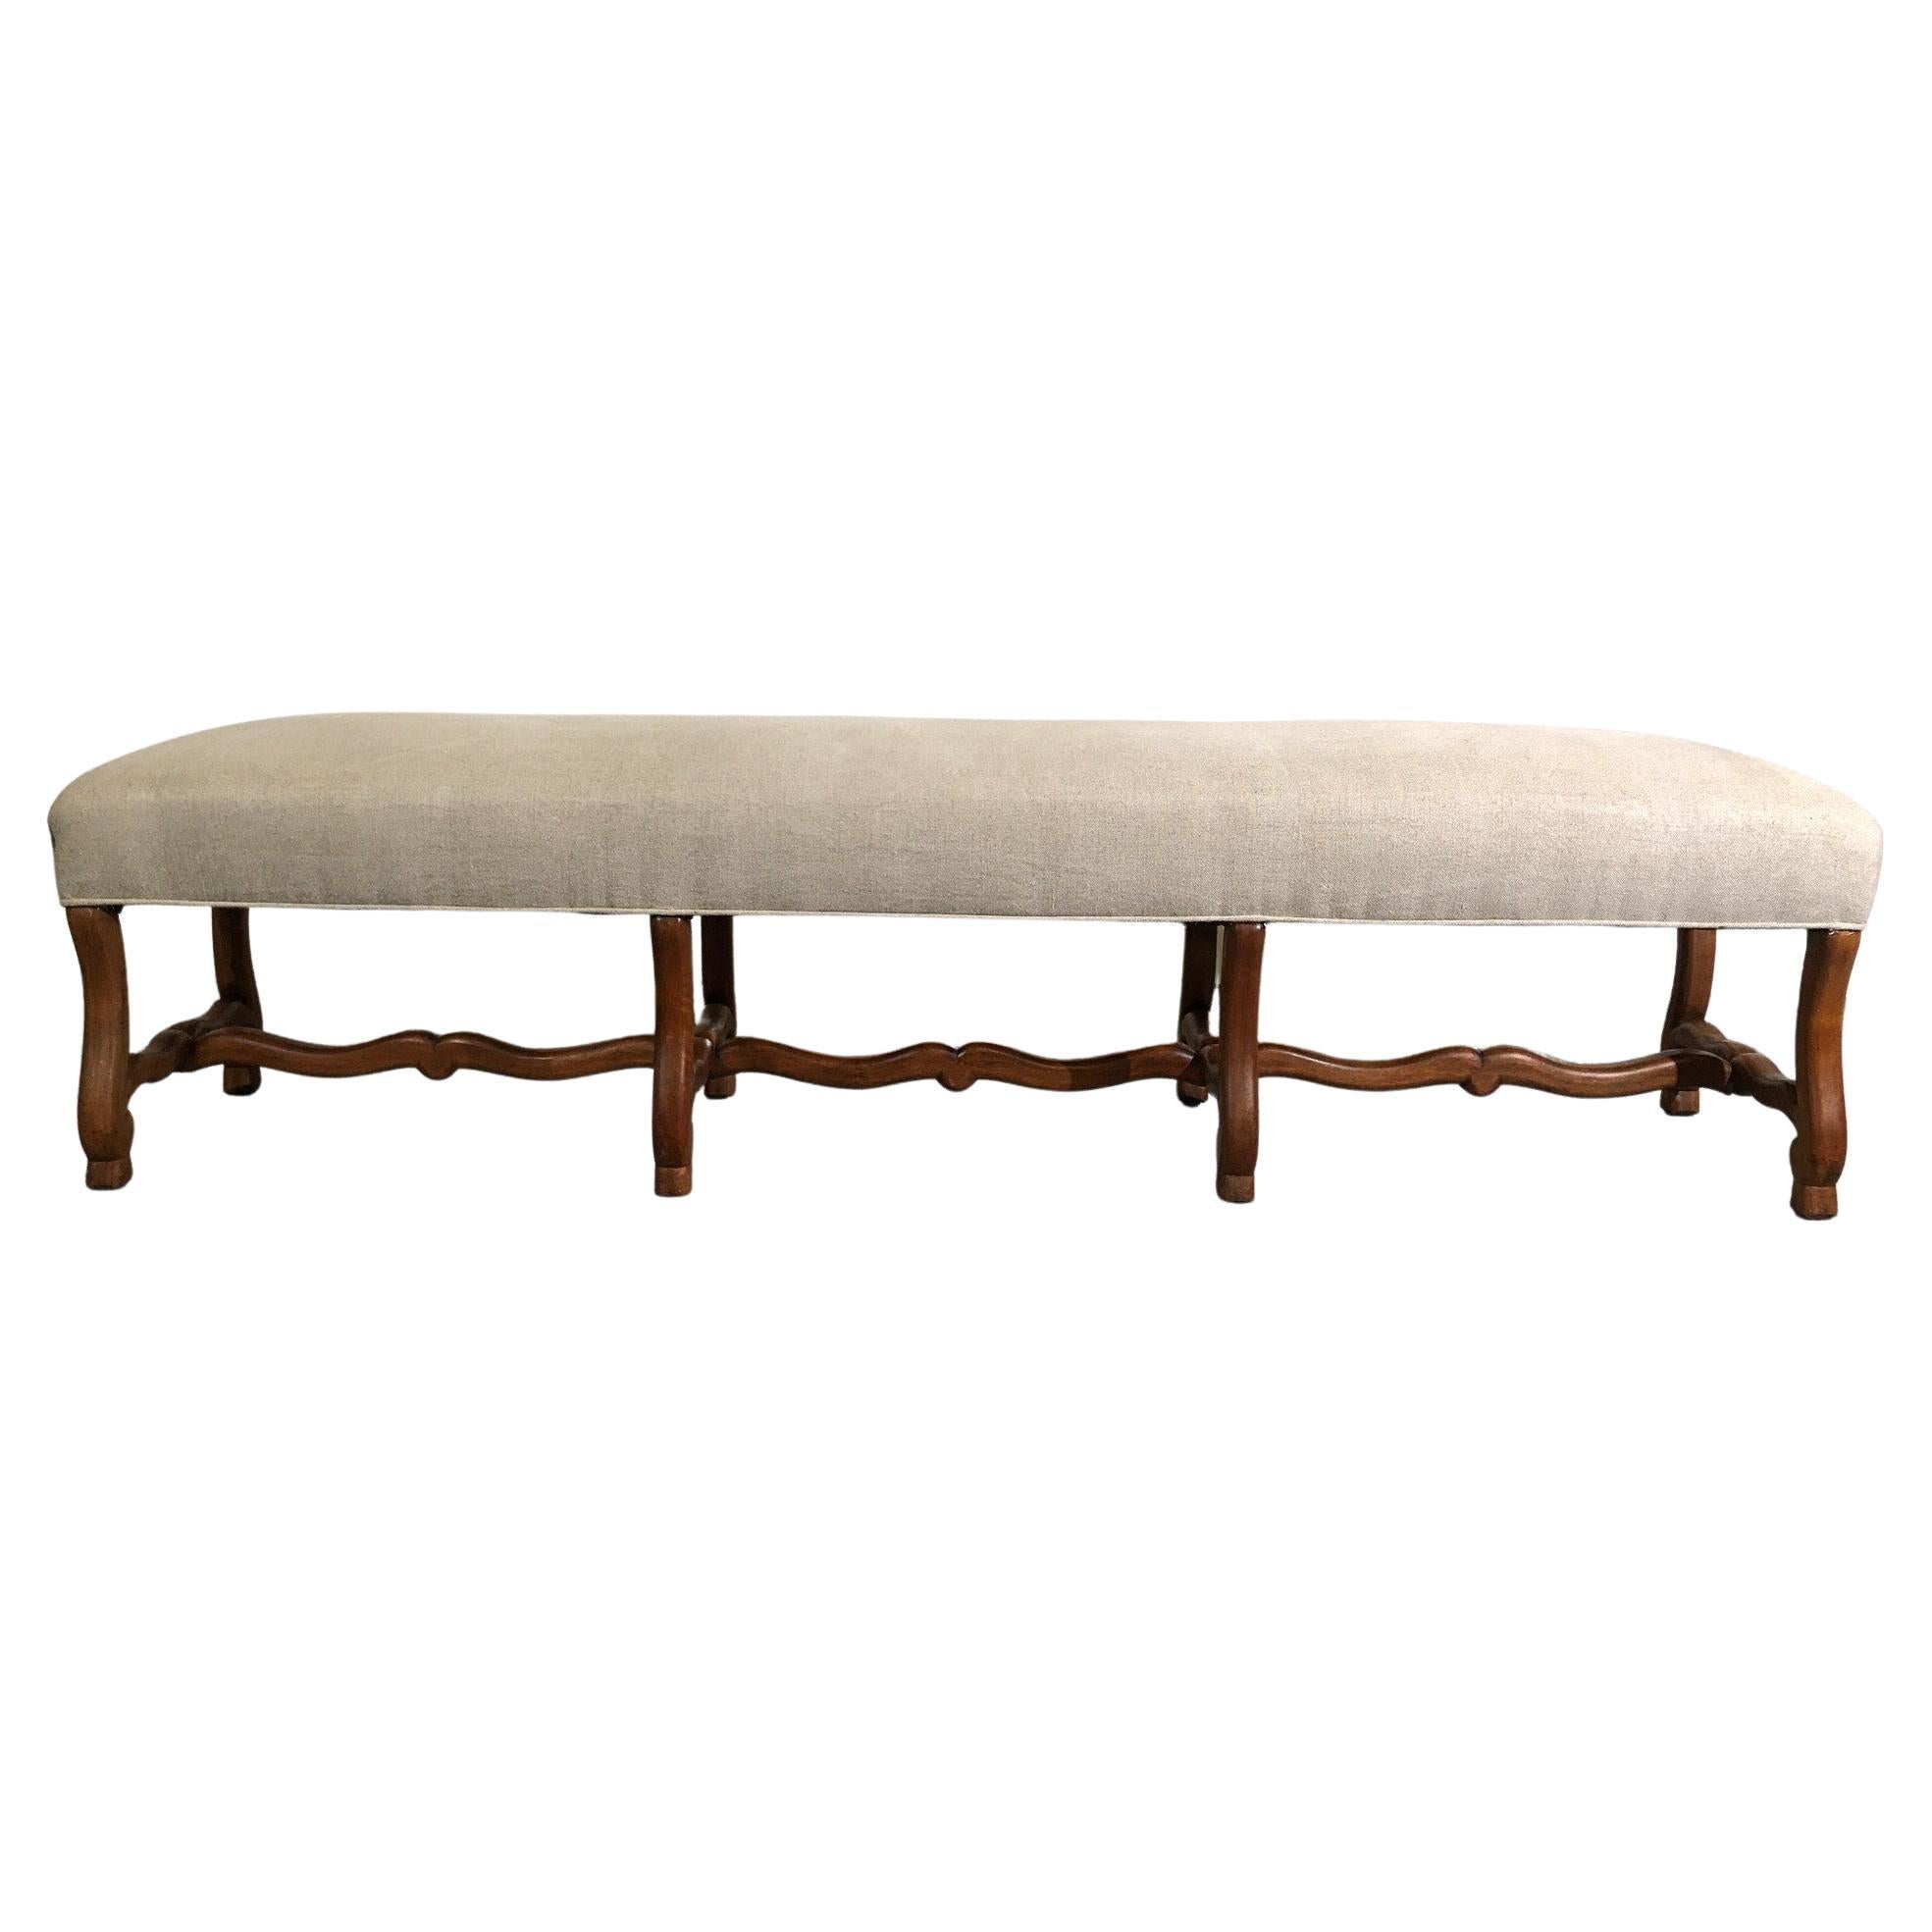 19th Century Louis XIV Style Extra Long Bench